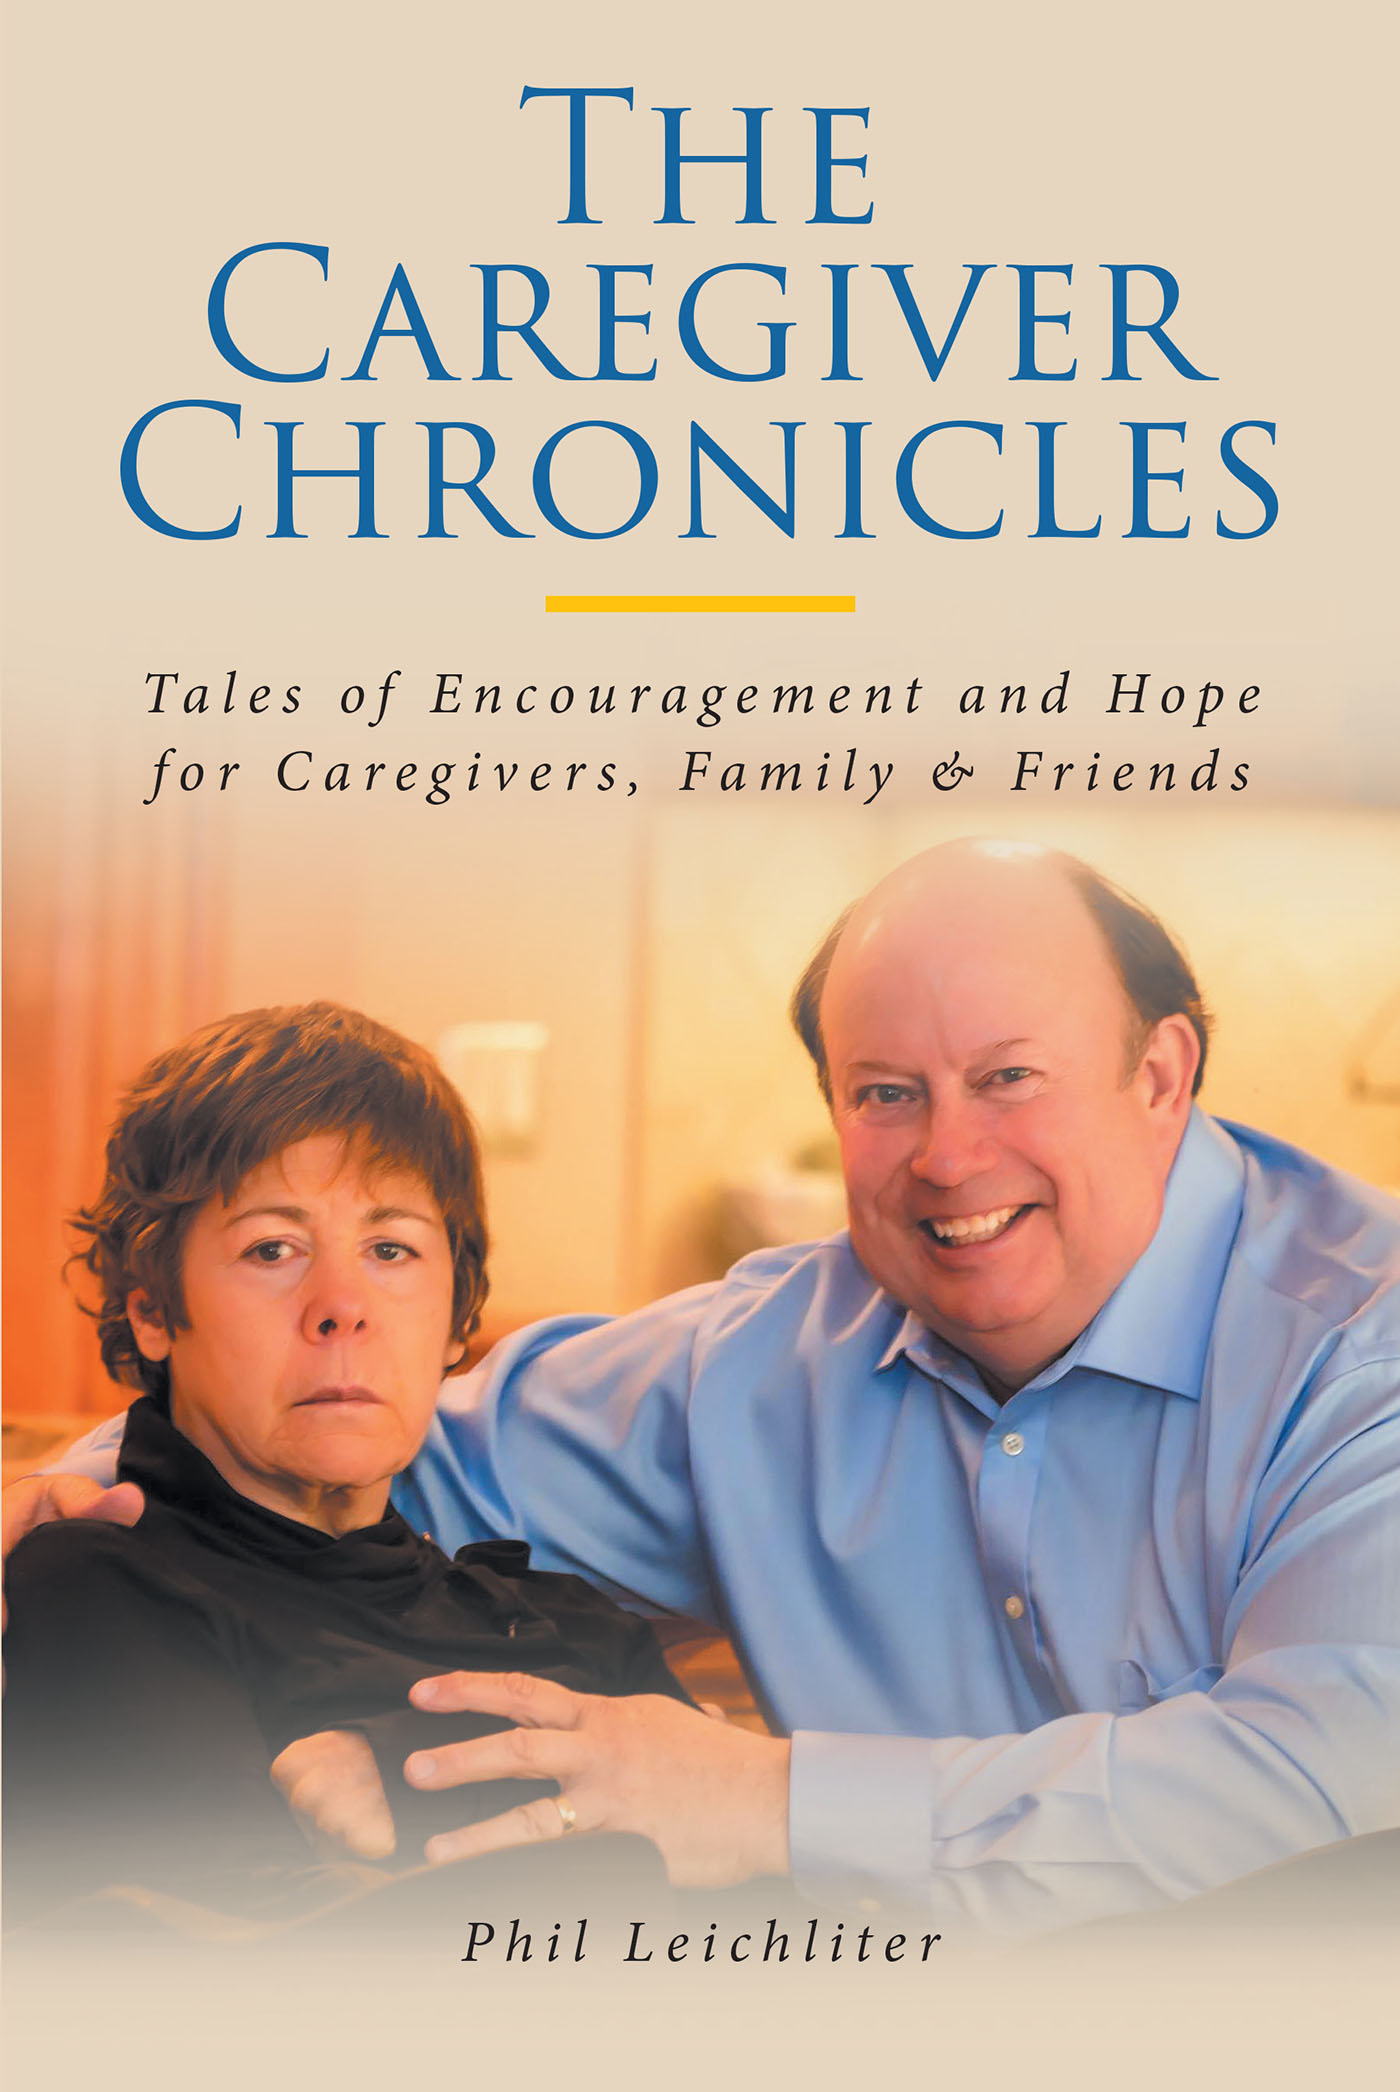 Phil Leichliter’s Newly Released "The Caregiver Chronicles: Tales of Encouragement and Hope for Caregivers, Family & Friends" is a Message of Compassion